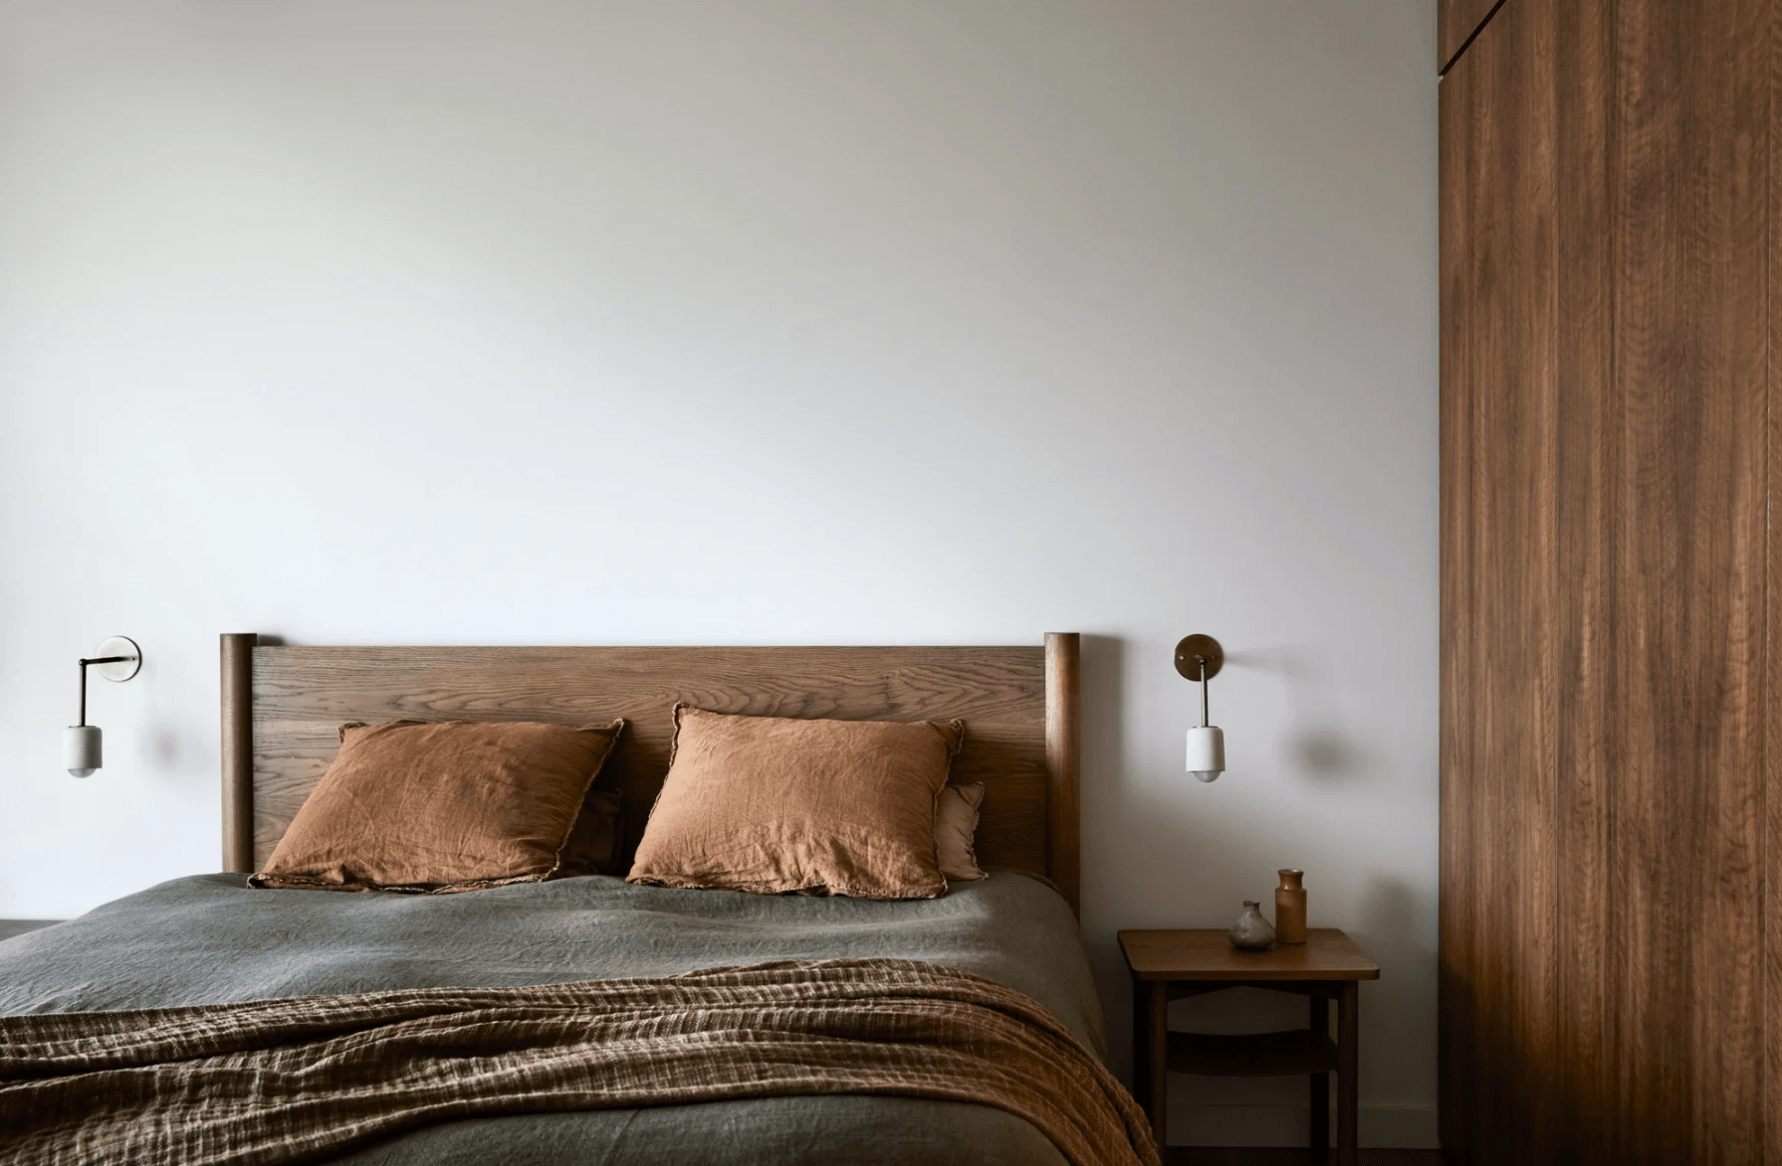 Styling: The Bedroom